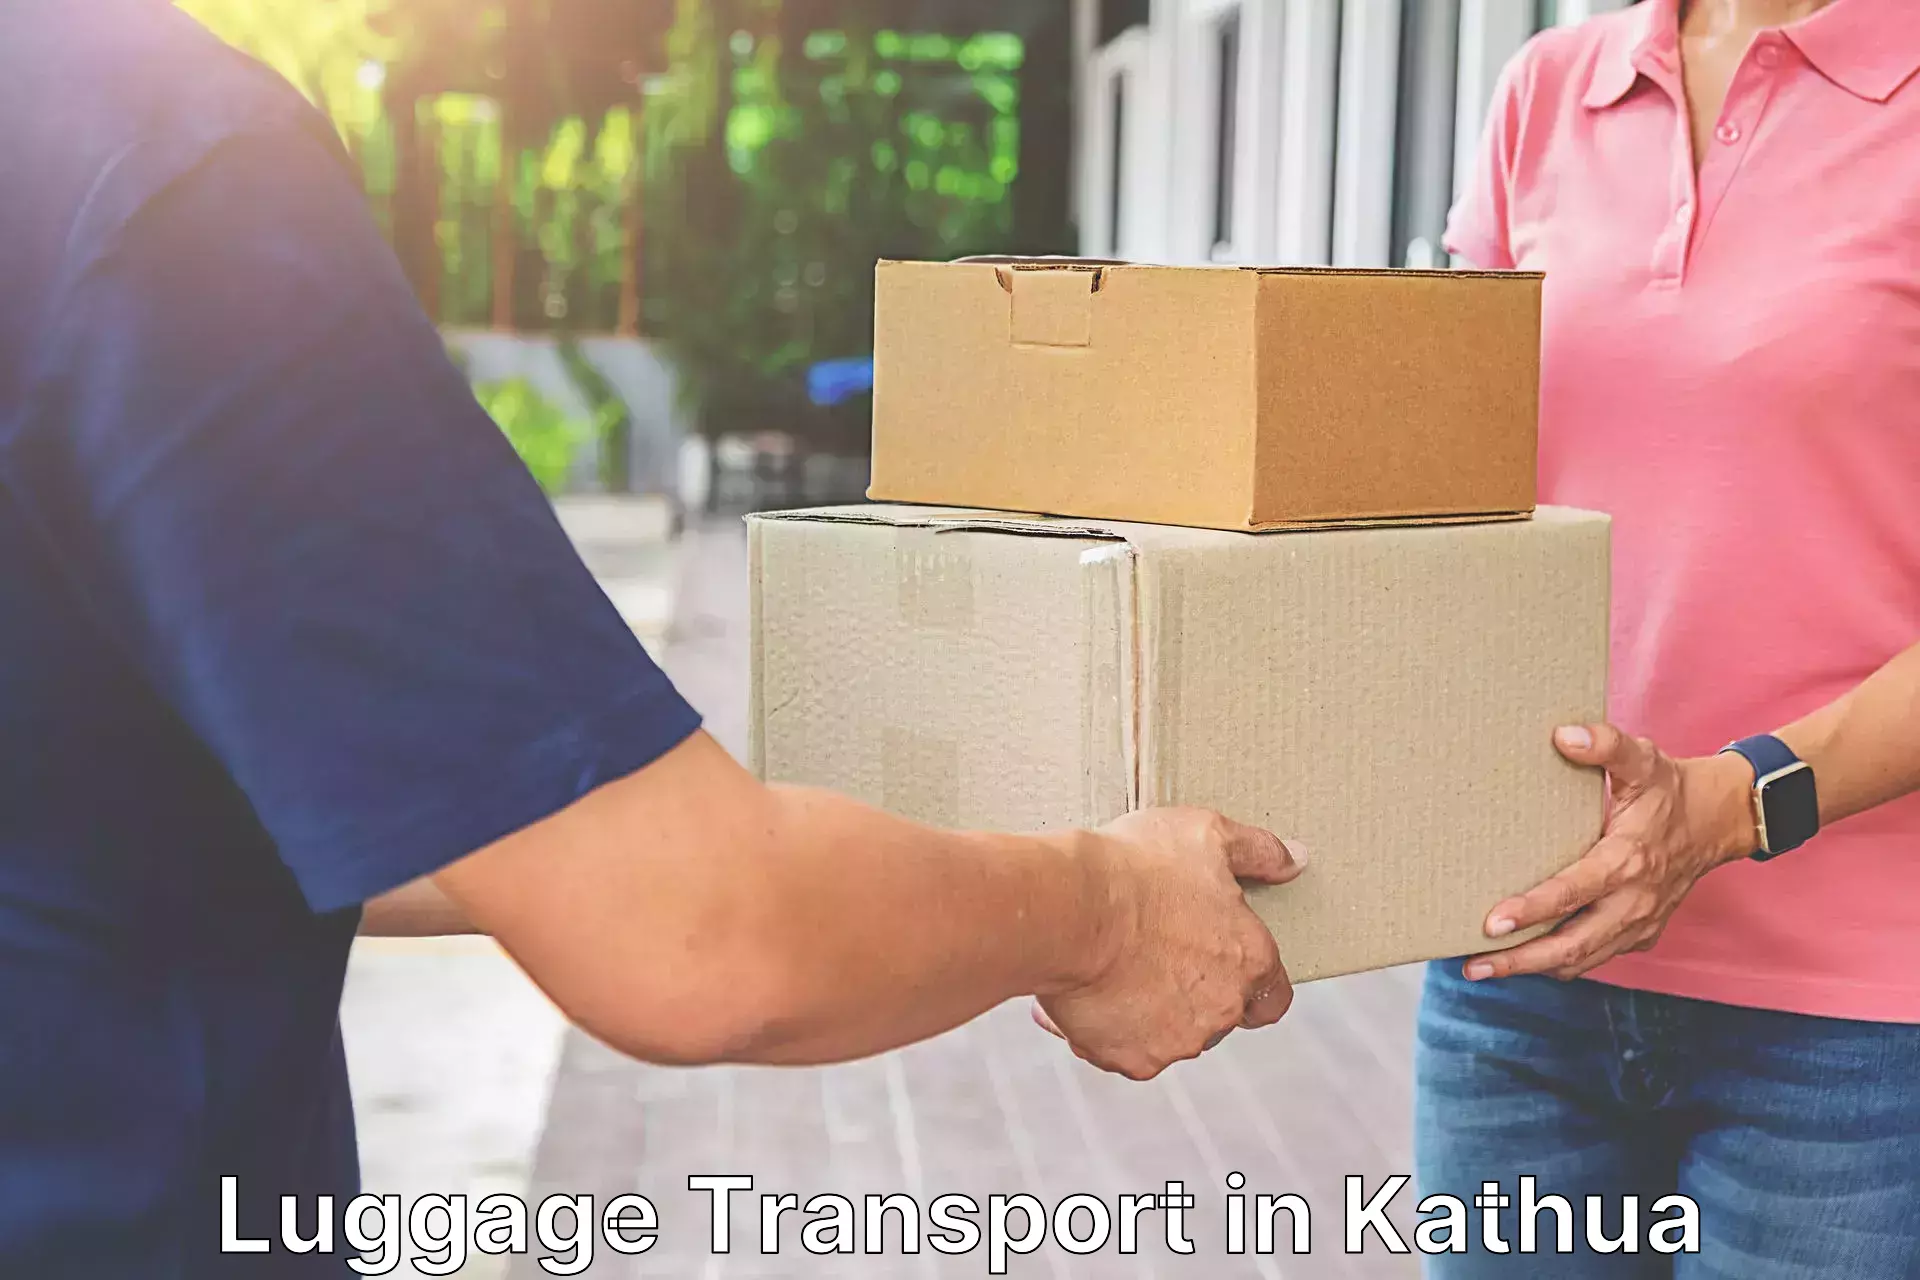 Luggage delivery app in Kathua